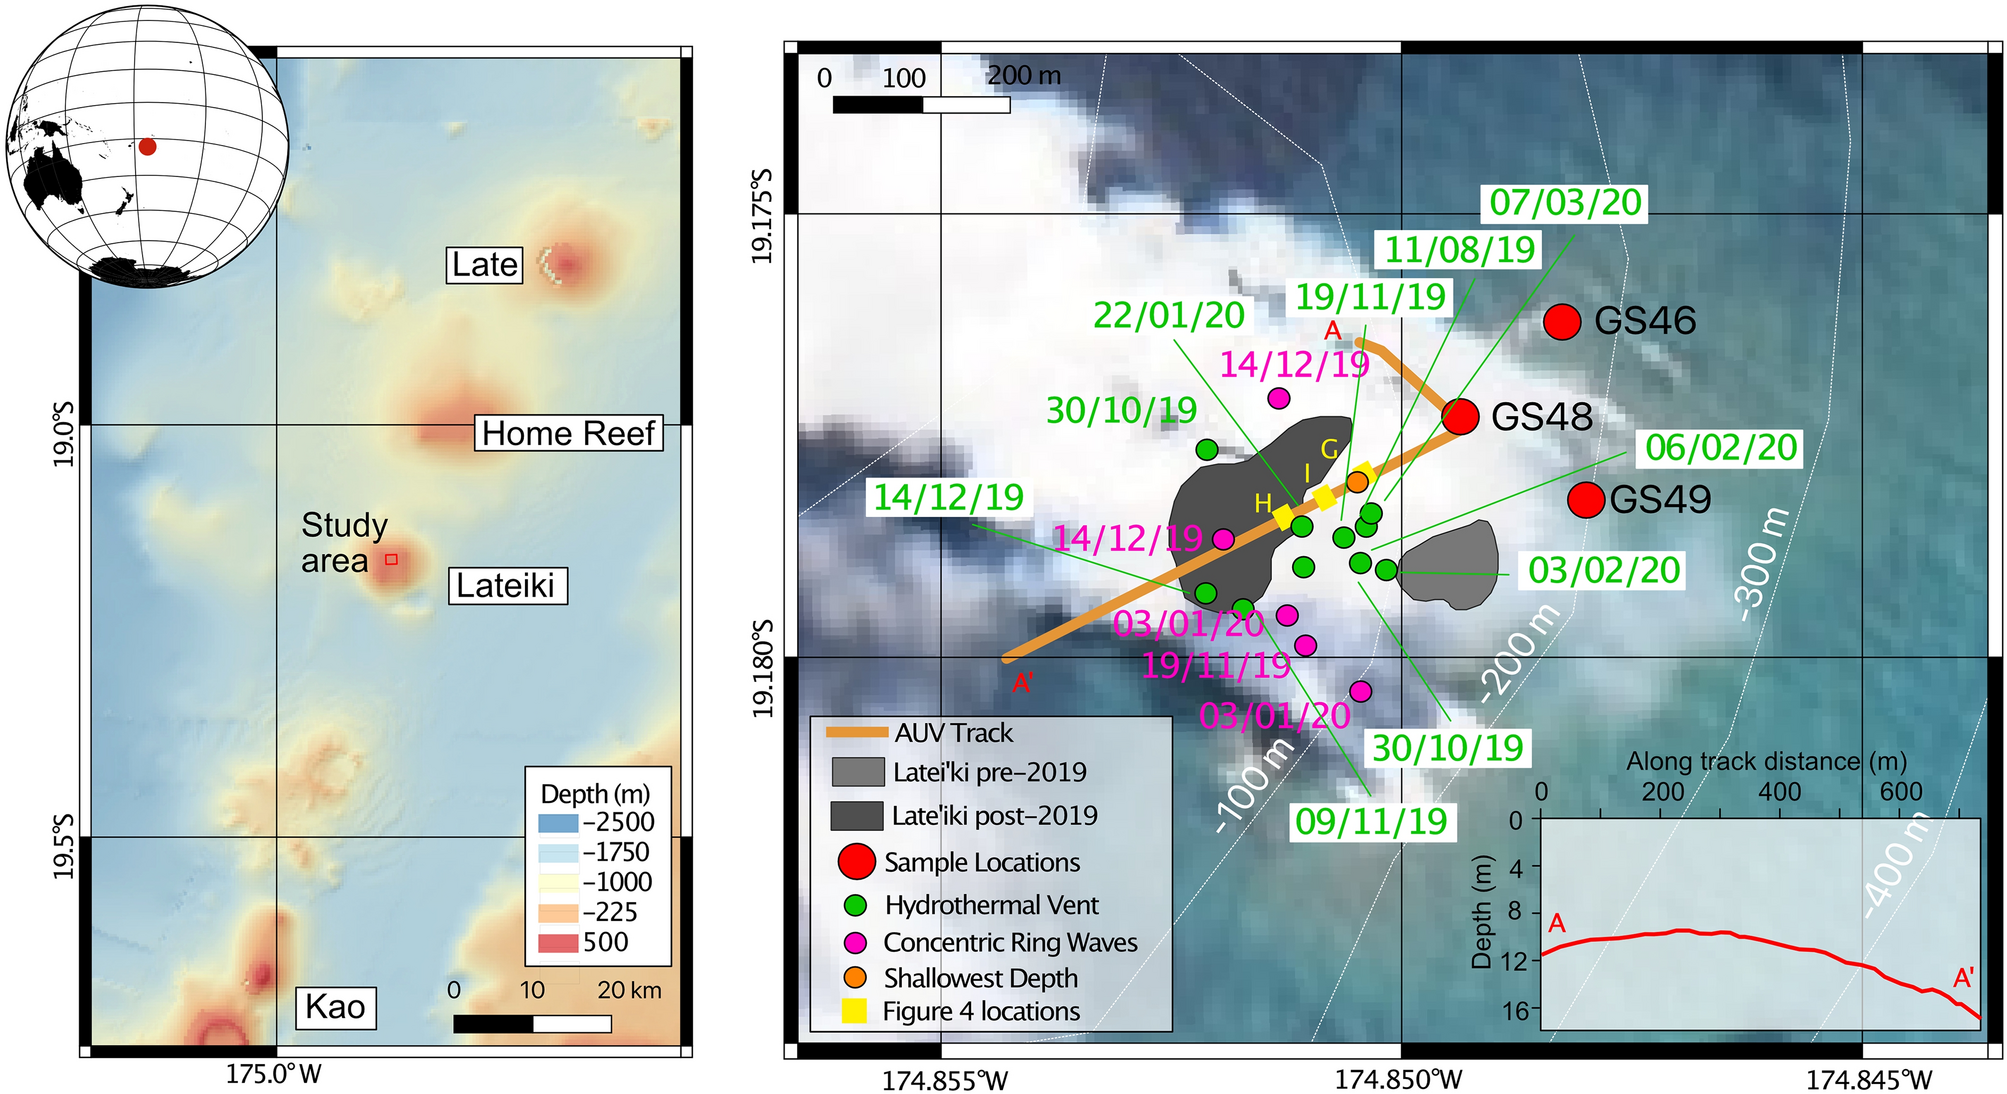 The 2019–2020 volcanic eruption of Late'iki (Metis Shoal), Tonga |  Scientific Reports